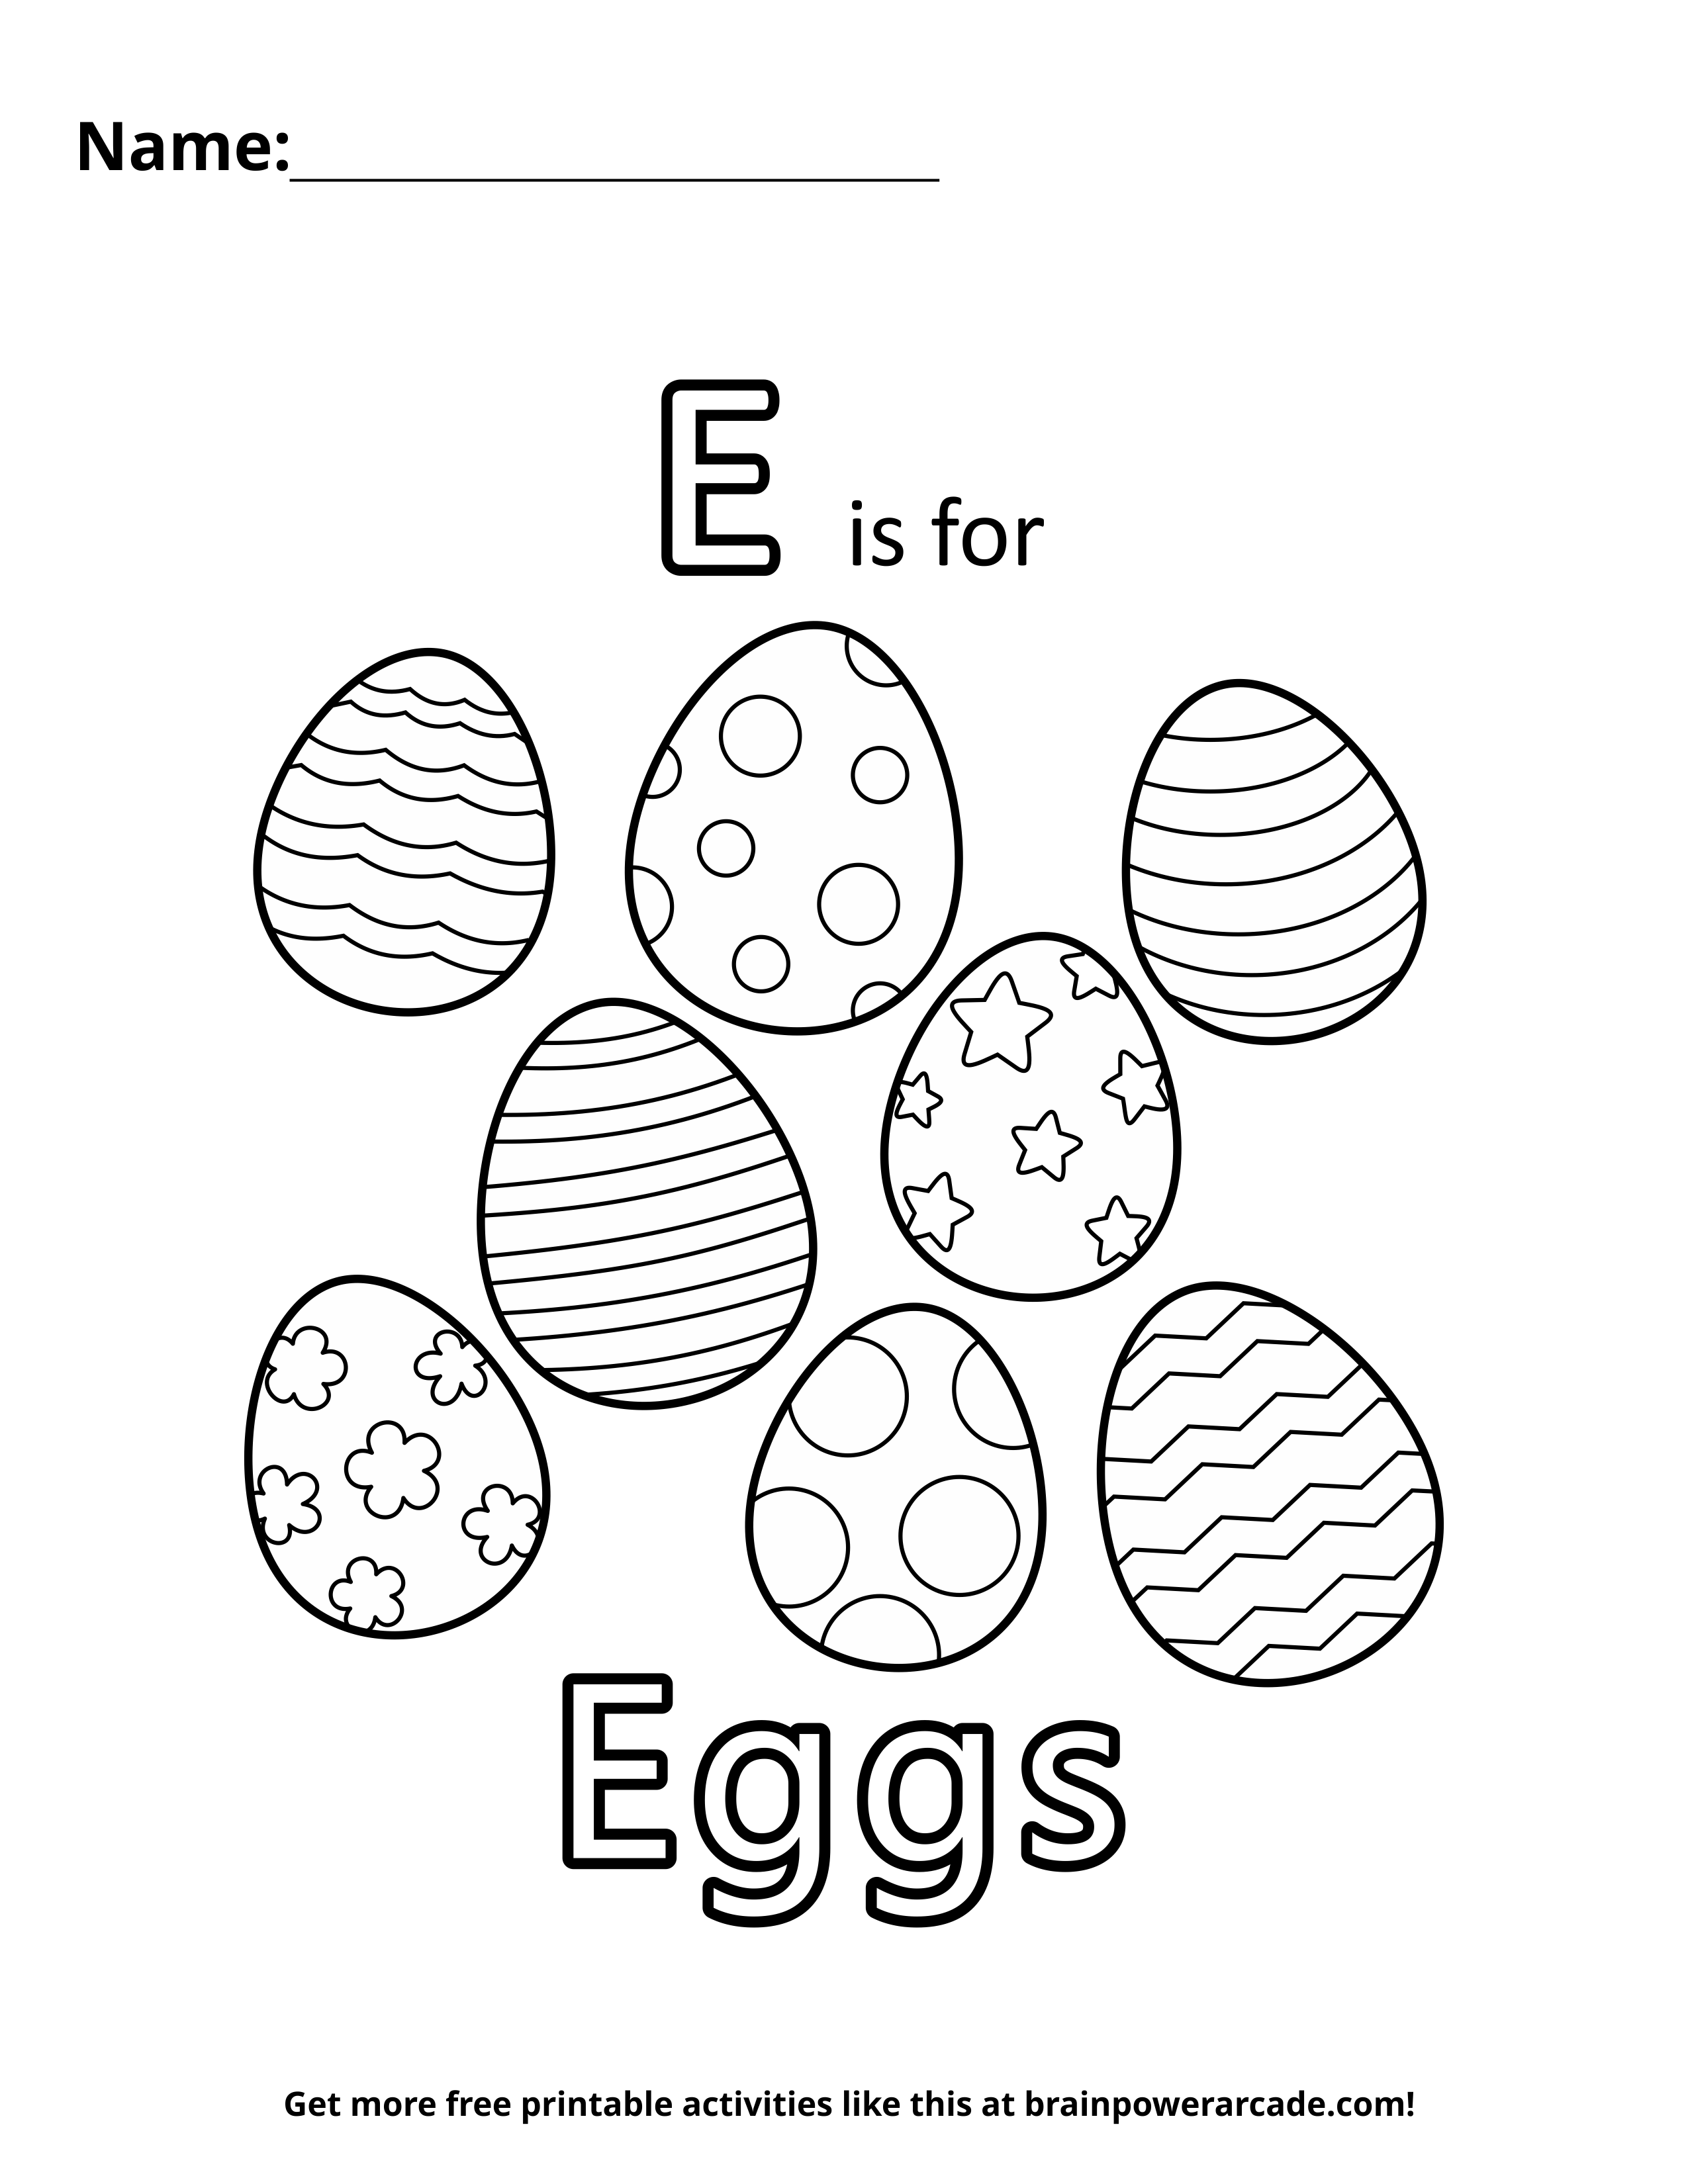 E is for Eggs Coloring Page